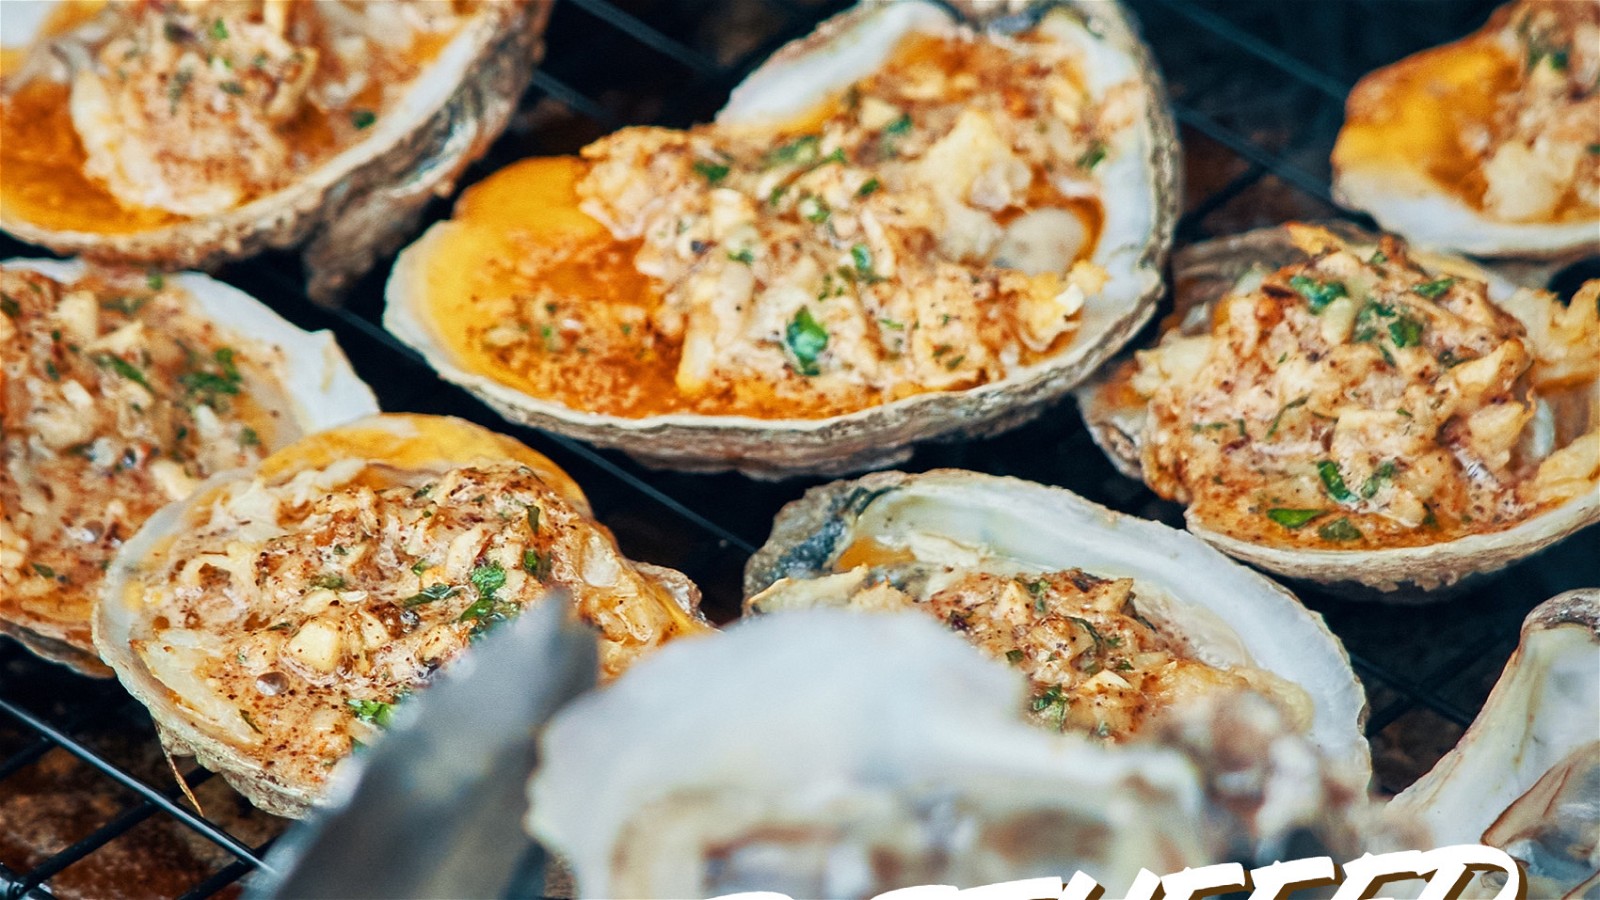 Image of Crab Stuffed Grilled Oysters